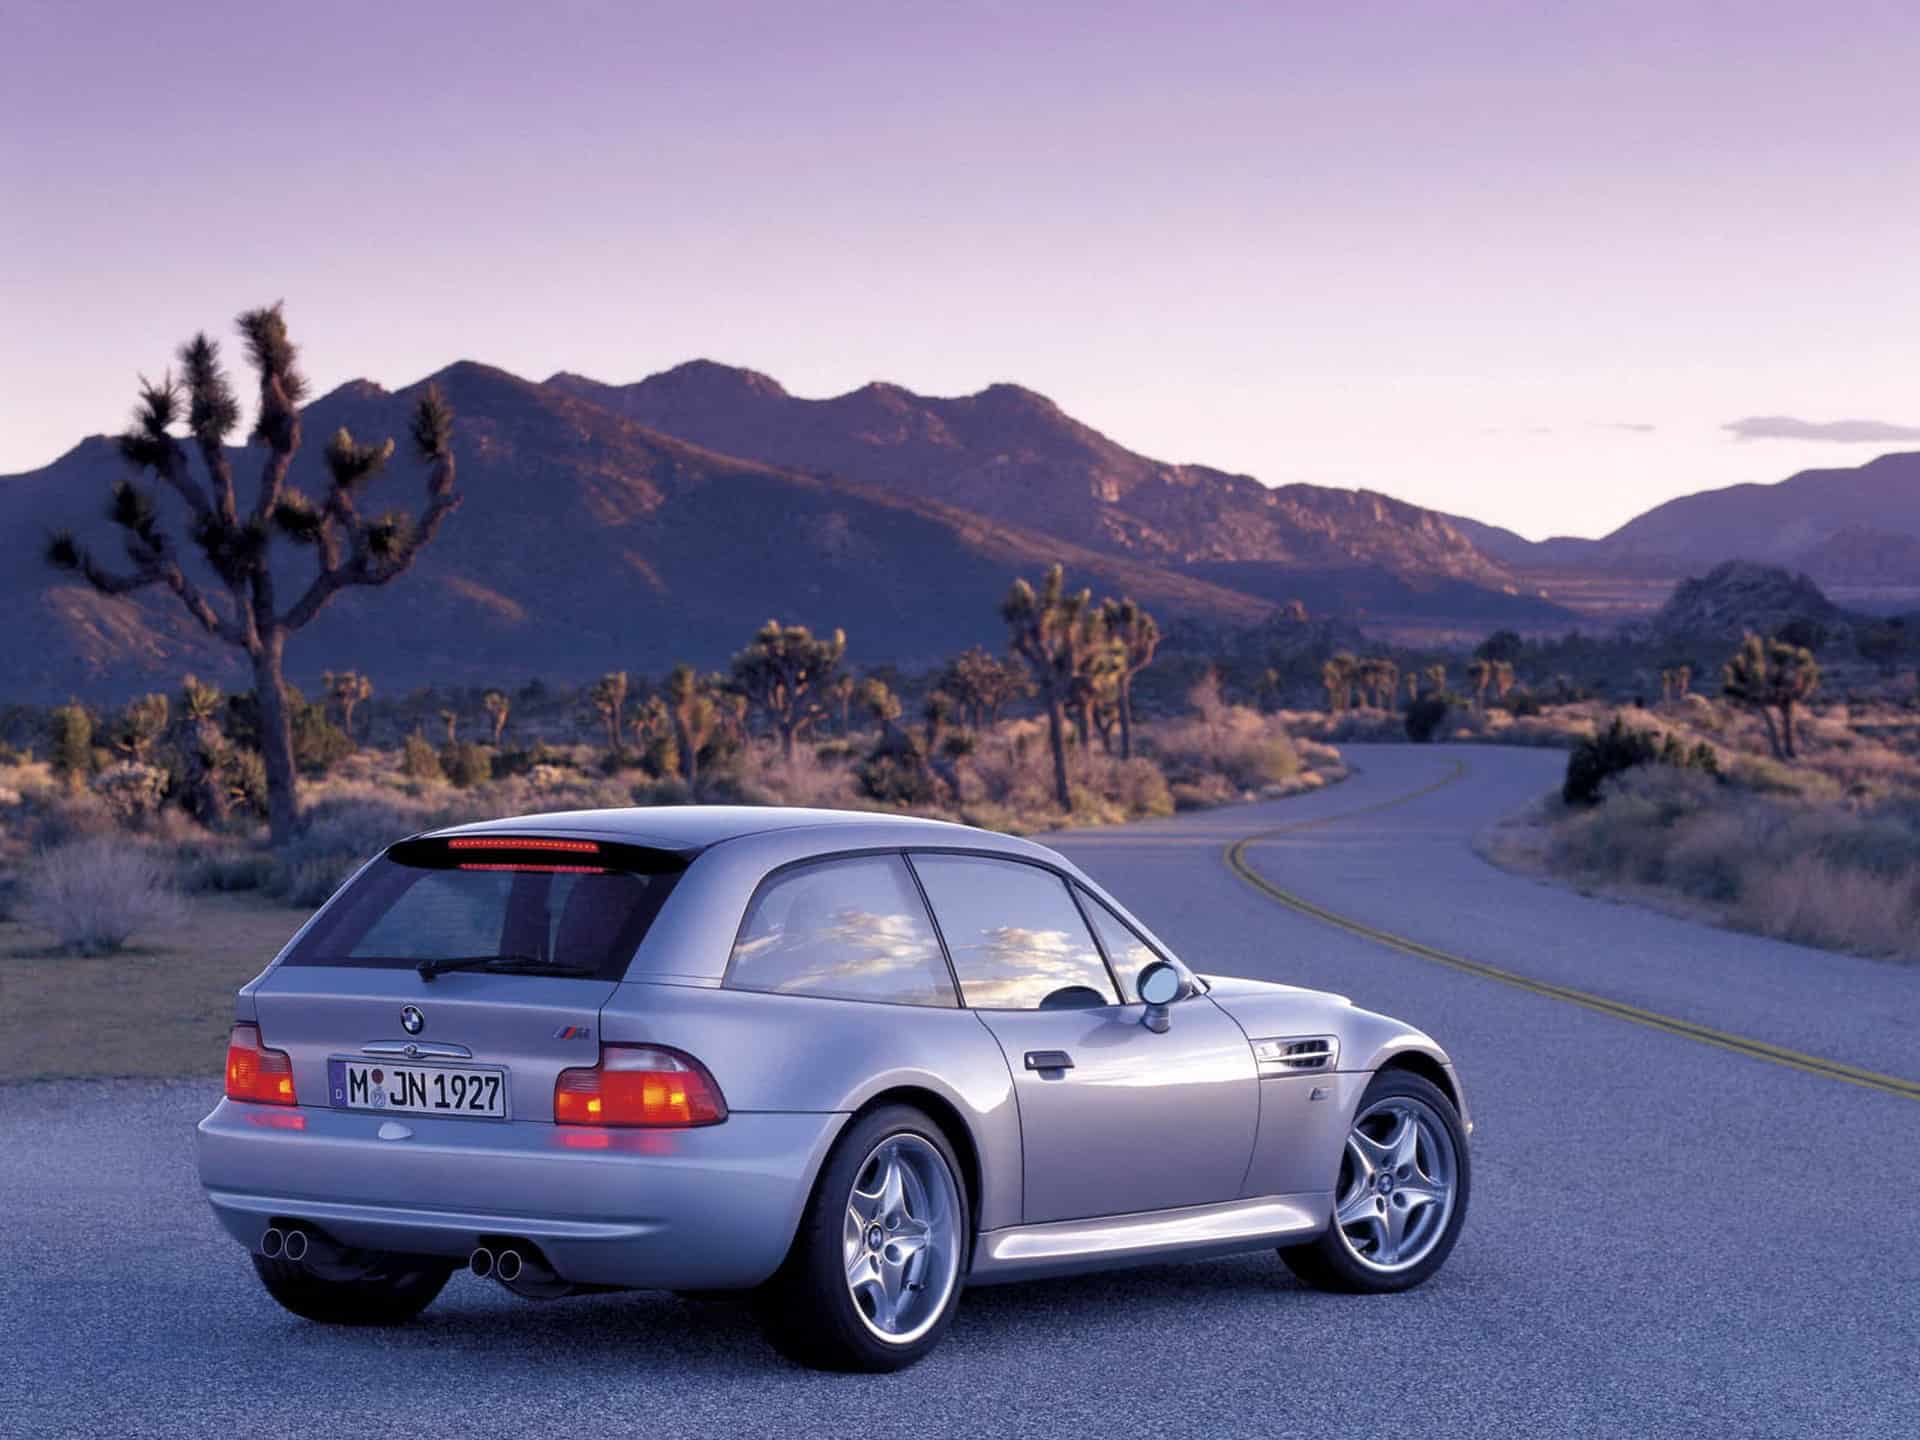 Video] Savagegeese review on BMW Z3 M Coupe - BMW.SG